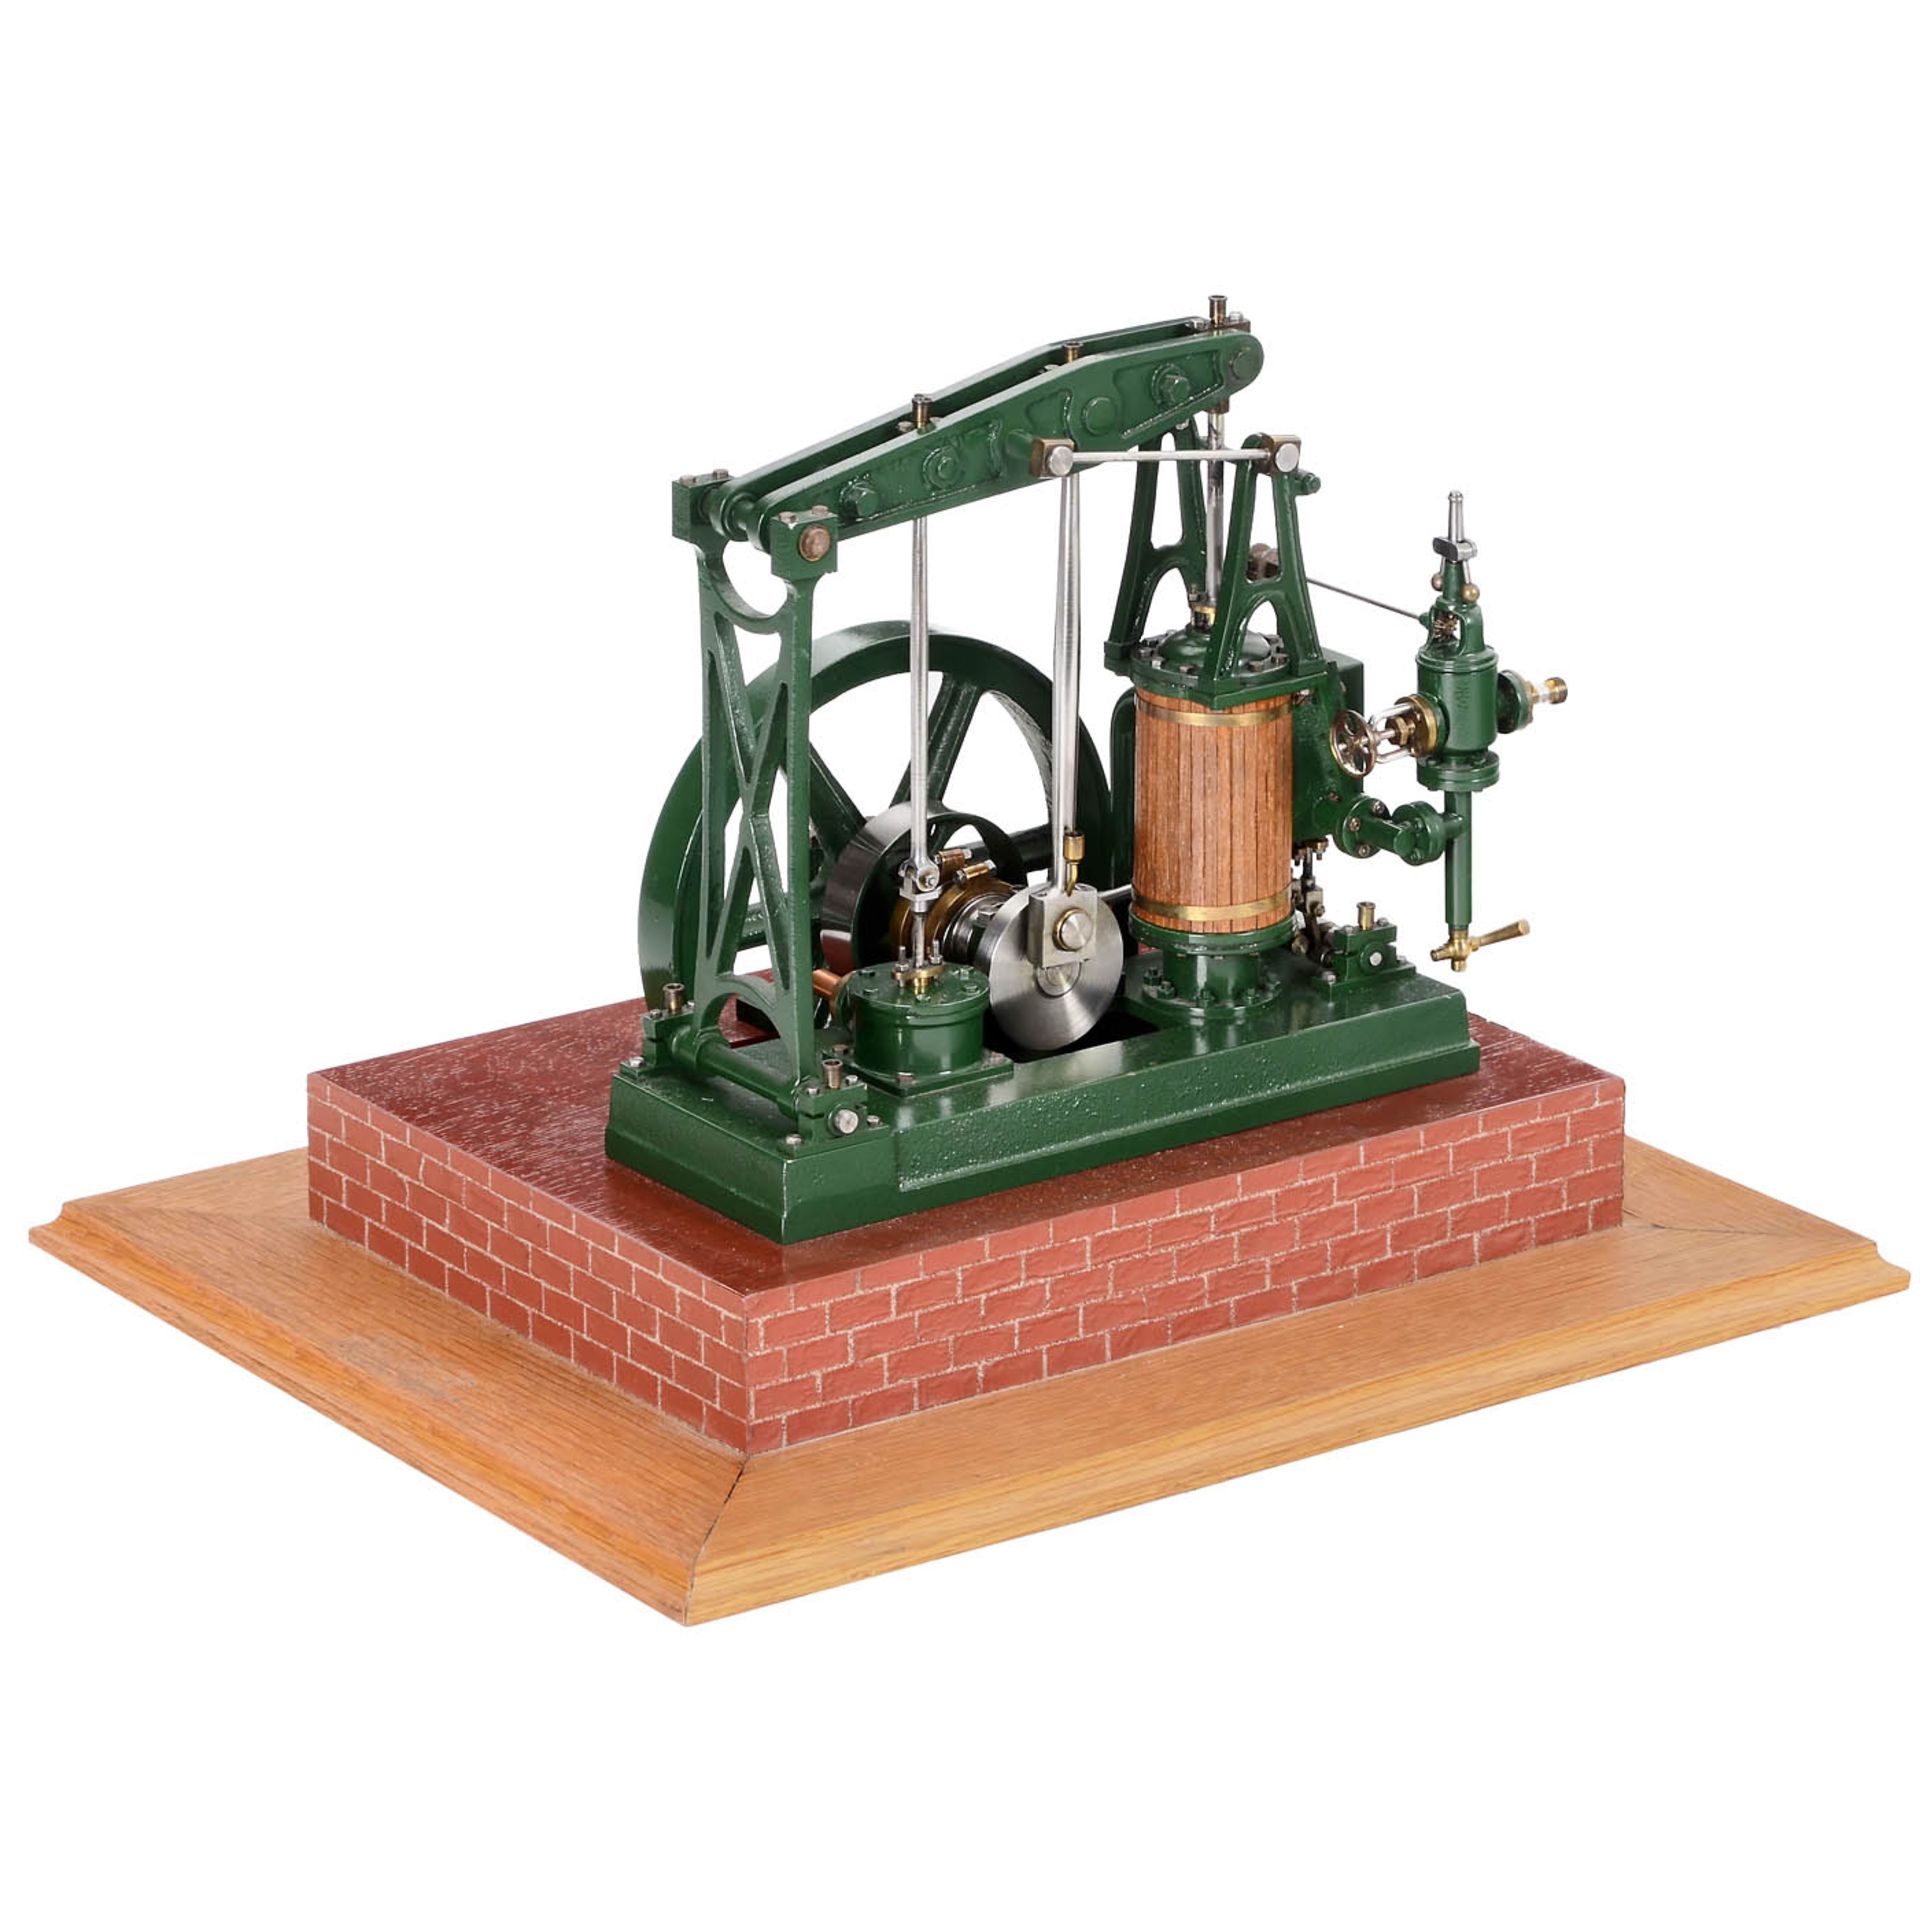 Model of an Easton and Anderson Grasshopper Beam Engine - Image 2 of 2